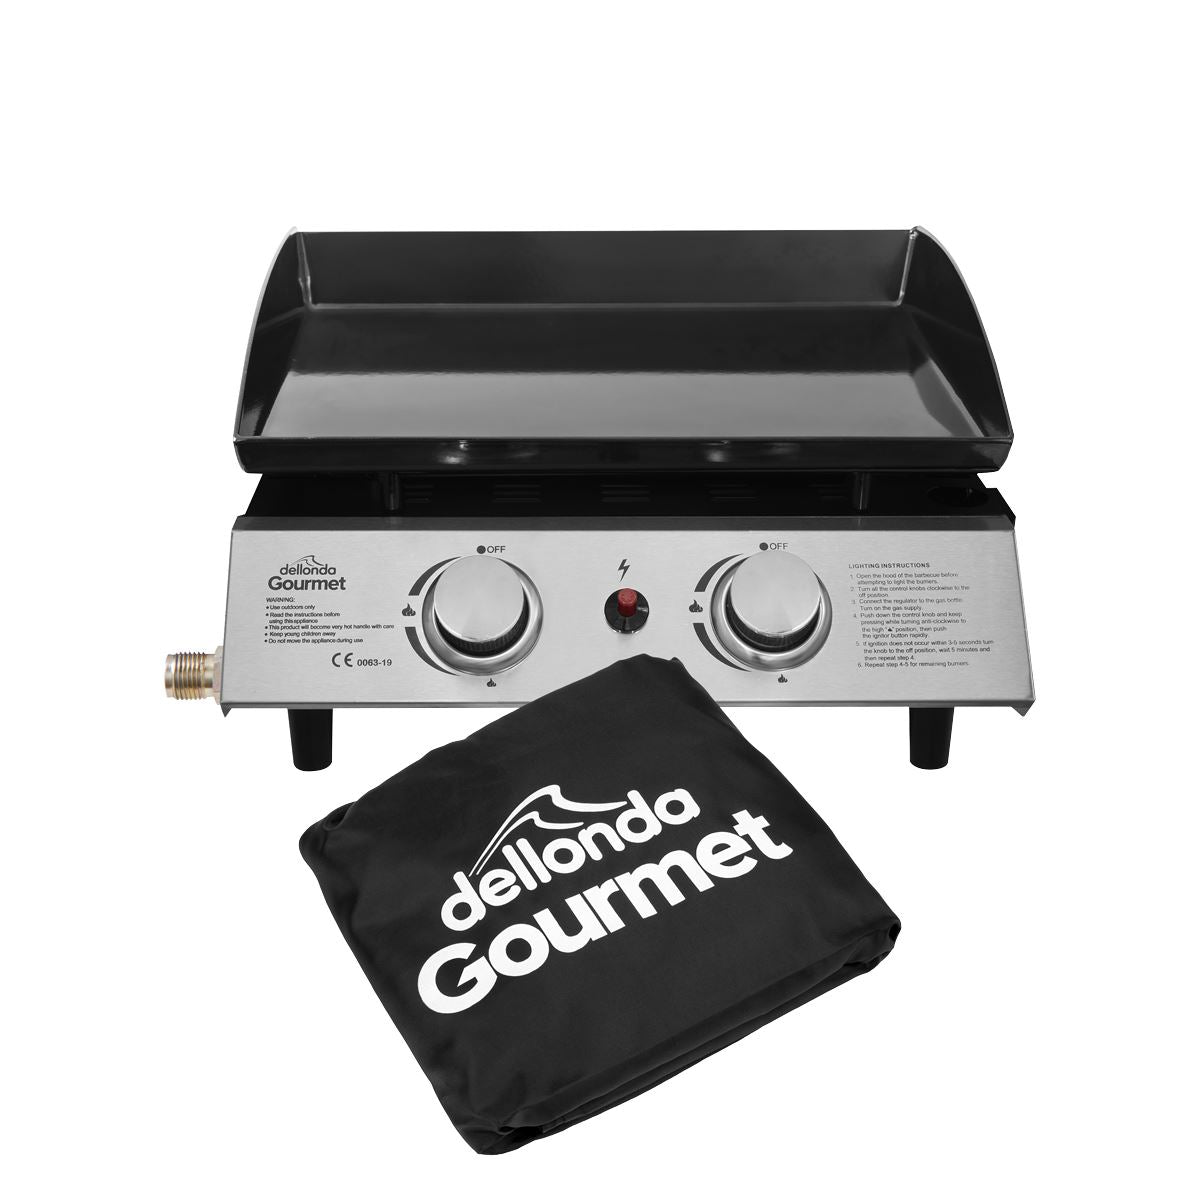 Dellonda 2 Burner Portable Gas Plancha 5kW BBQ Griddle, Includes PVC Cover, Stainless Steel